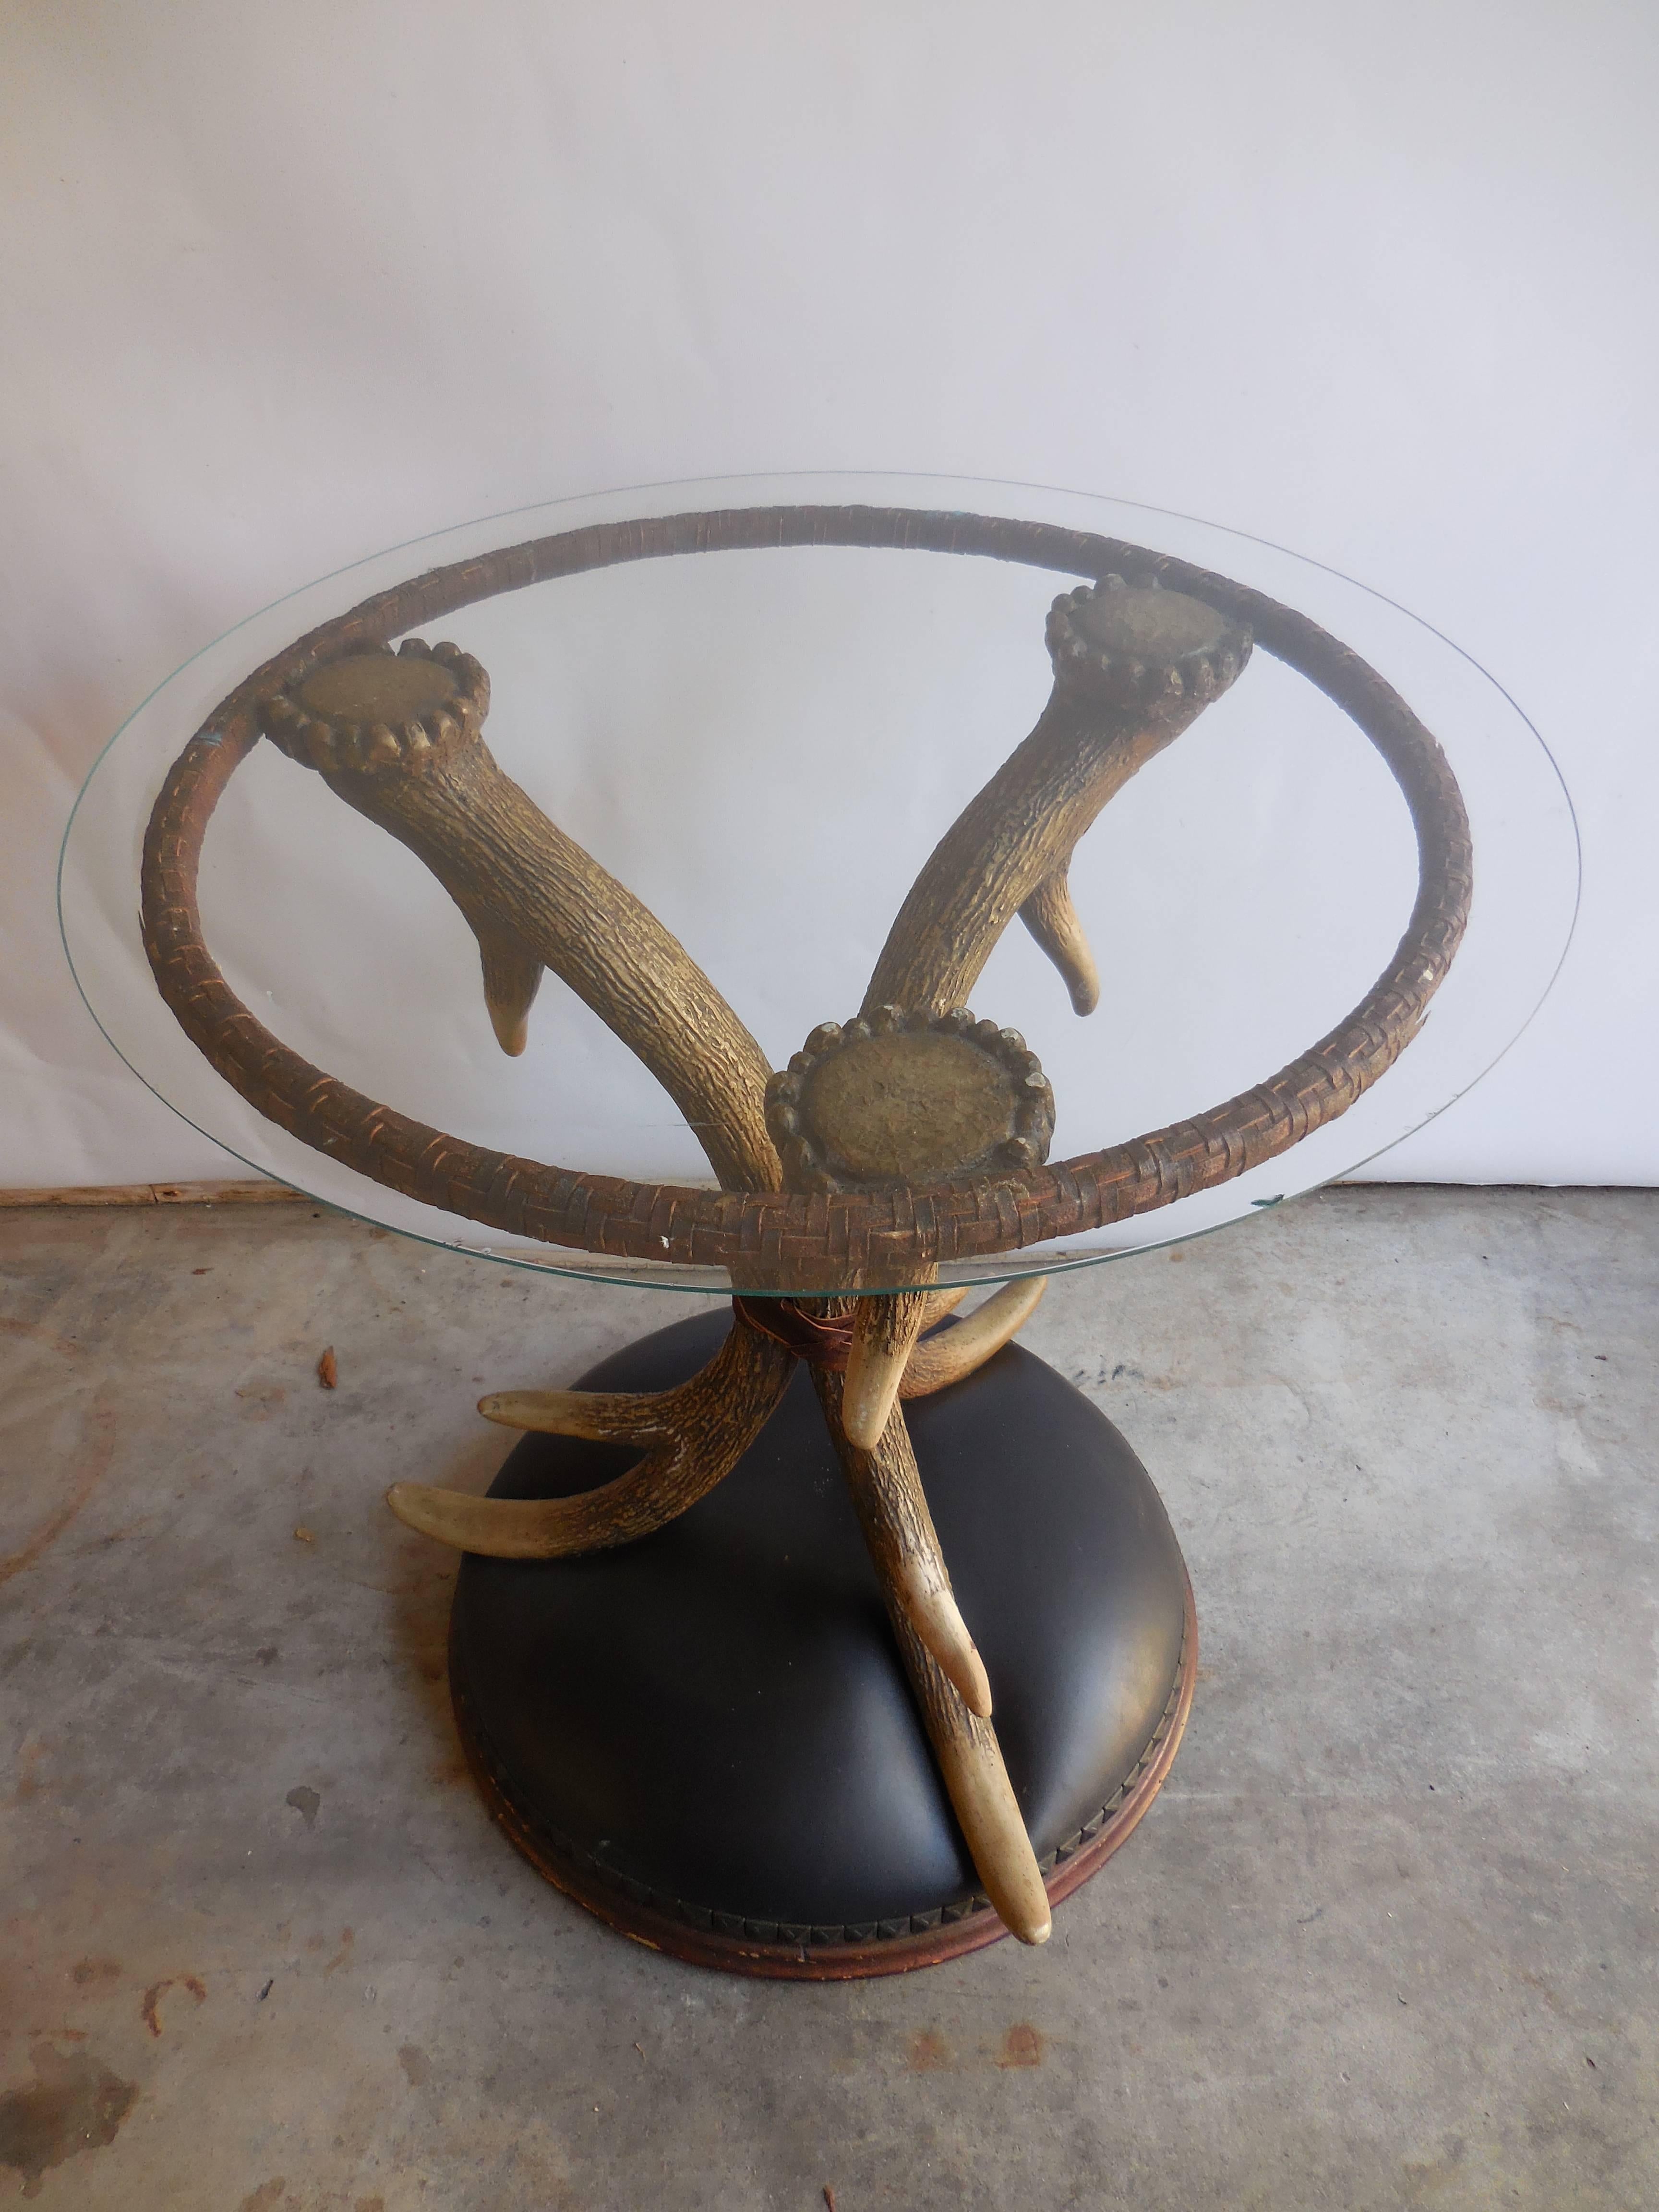 Resin antler side table in excellent condition, circa 1930s. One of a kind.